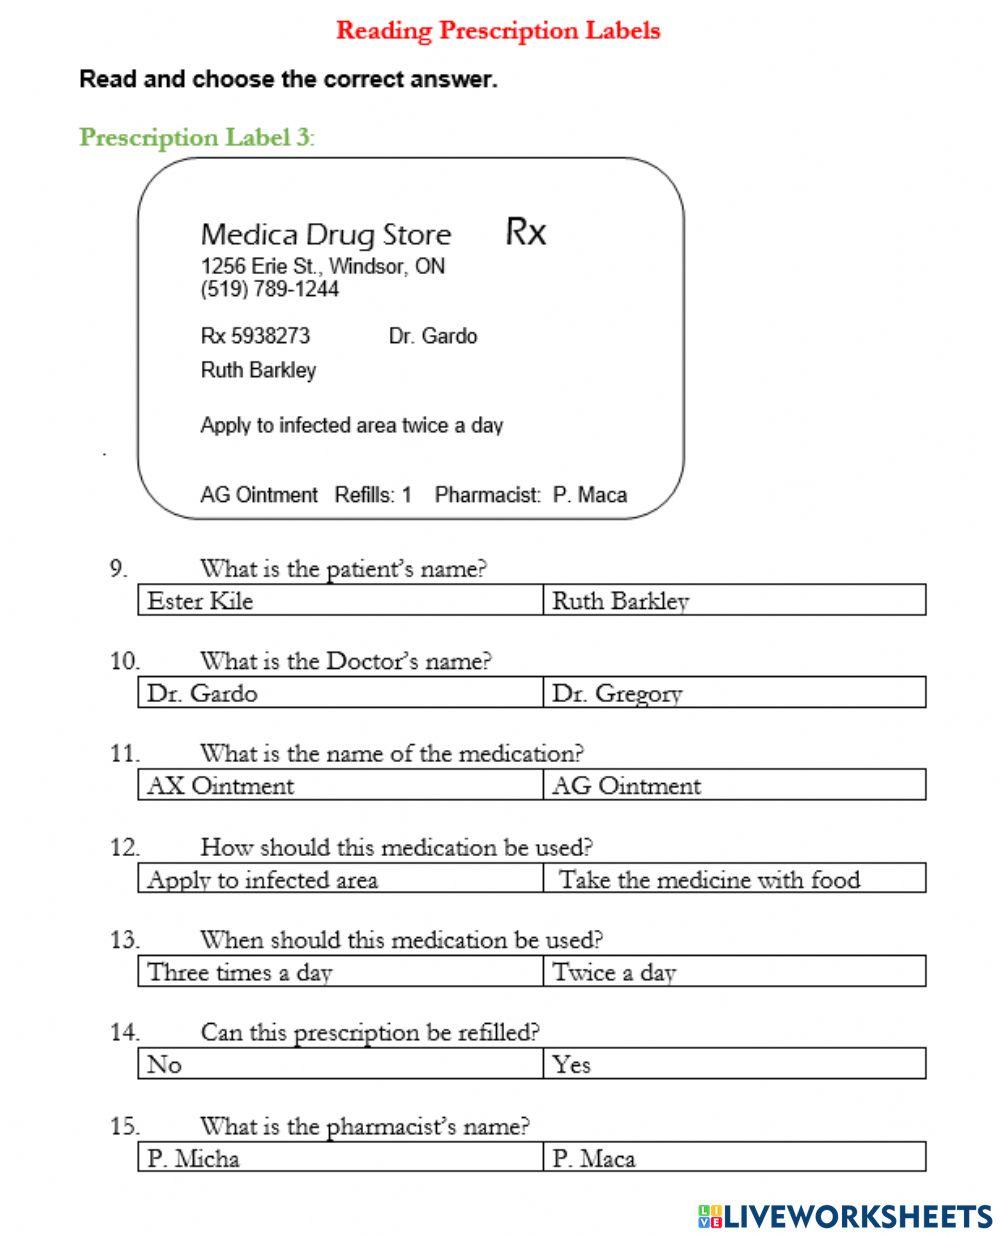 Reading a Pharmacy Label- part 3